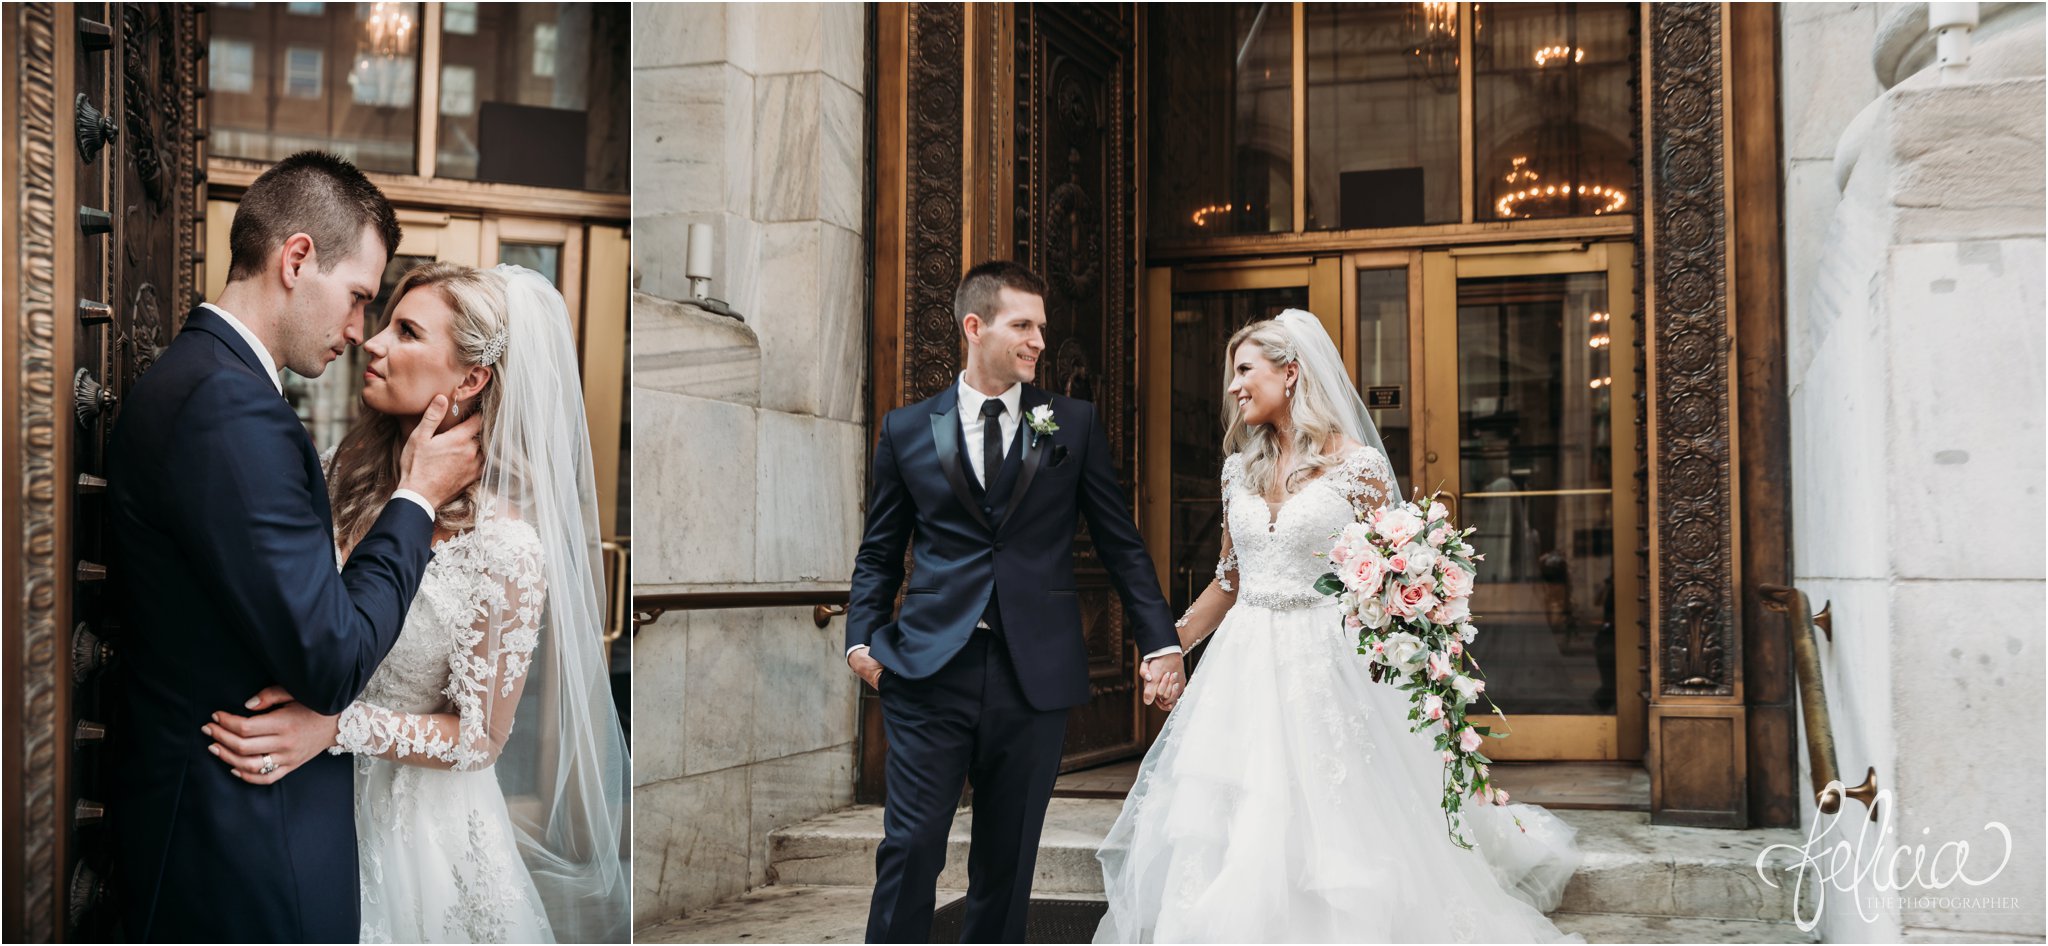 images by feliciathephotographer.com | wedding photographer | kansas city | redemptorist | classic | portrait | bride and groom | library | romantic | intimate | whimsical | romantic | lace long sleeve dress | navy suit | power couple | pink florals 